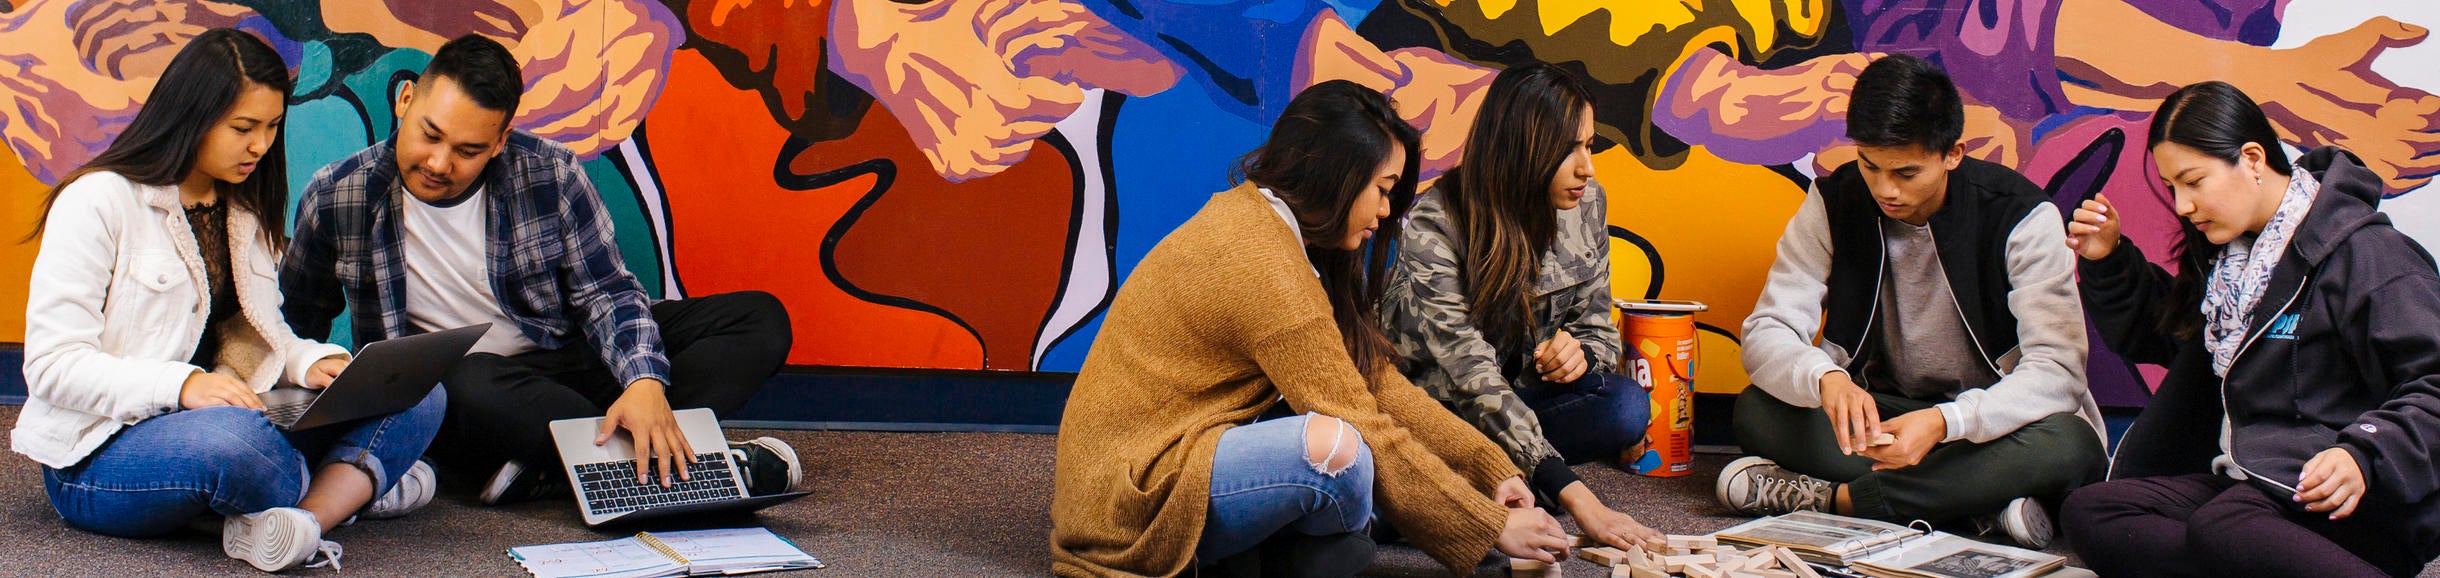 Students studying in front of the Asian Pacific Student Programs murals